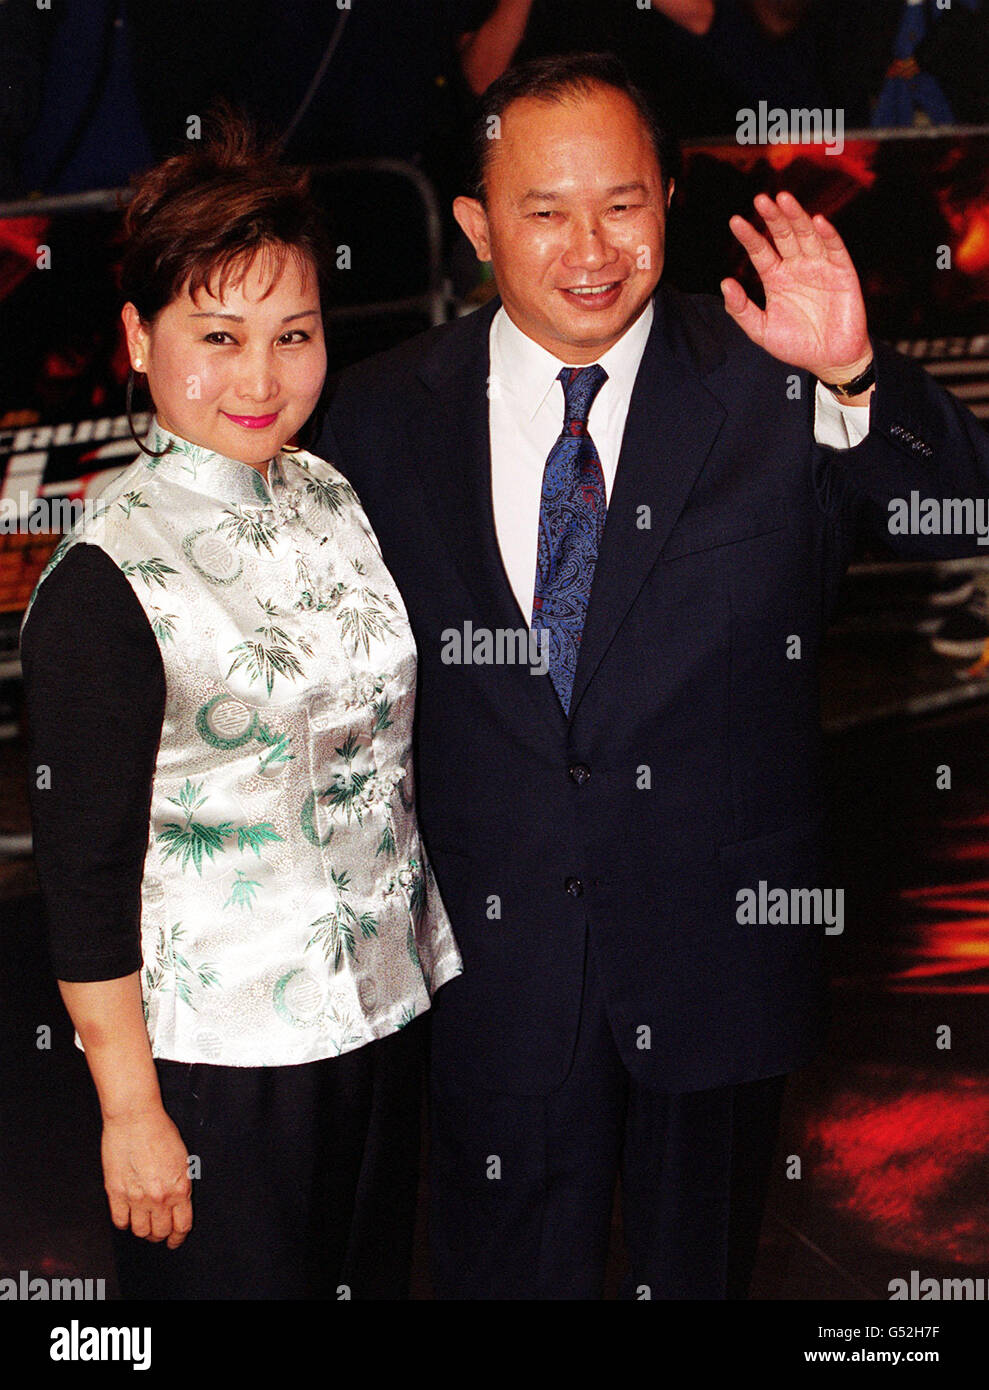 Film director John Woo and his wife arrive for the Gala Premiere of the Mission Impossible sequel, M:I-2, at the Empire cinema Leicester Square, central London. Tom Cruise stars as special agent Ethan Hunt in the romantic action thriller. * derived from the cult TV series from the 1960's. Stock Photo